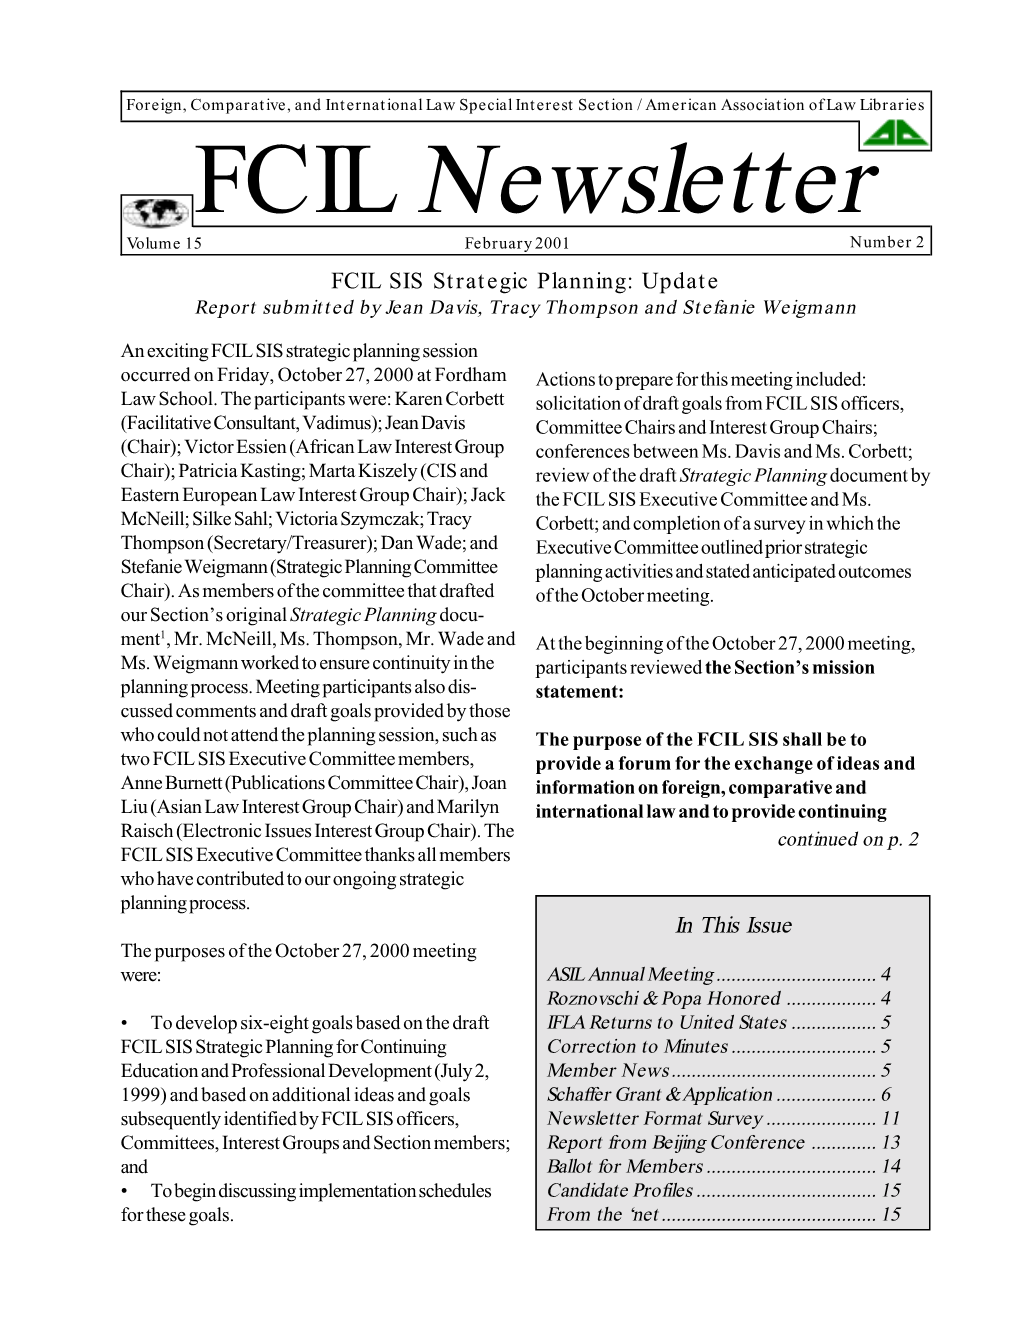 FCIL Newsletter Volume 15 February 2001 Number 2 FCIL SIS Strategic Planning: Update Report Submitted by Jean Davis, Tracy Thompson and Stefanie Weigmann